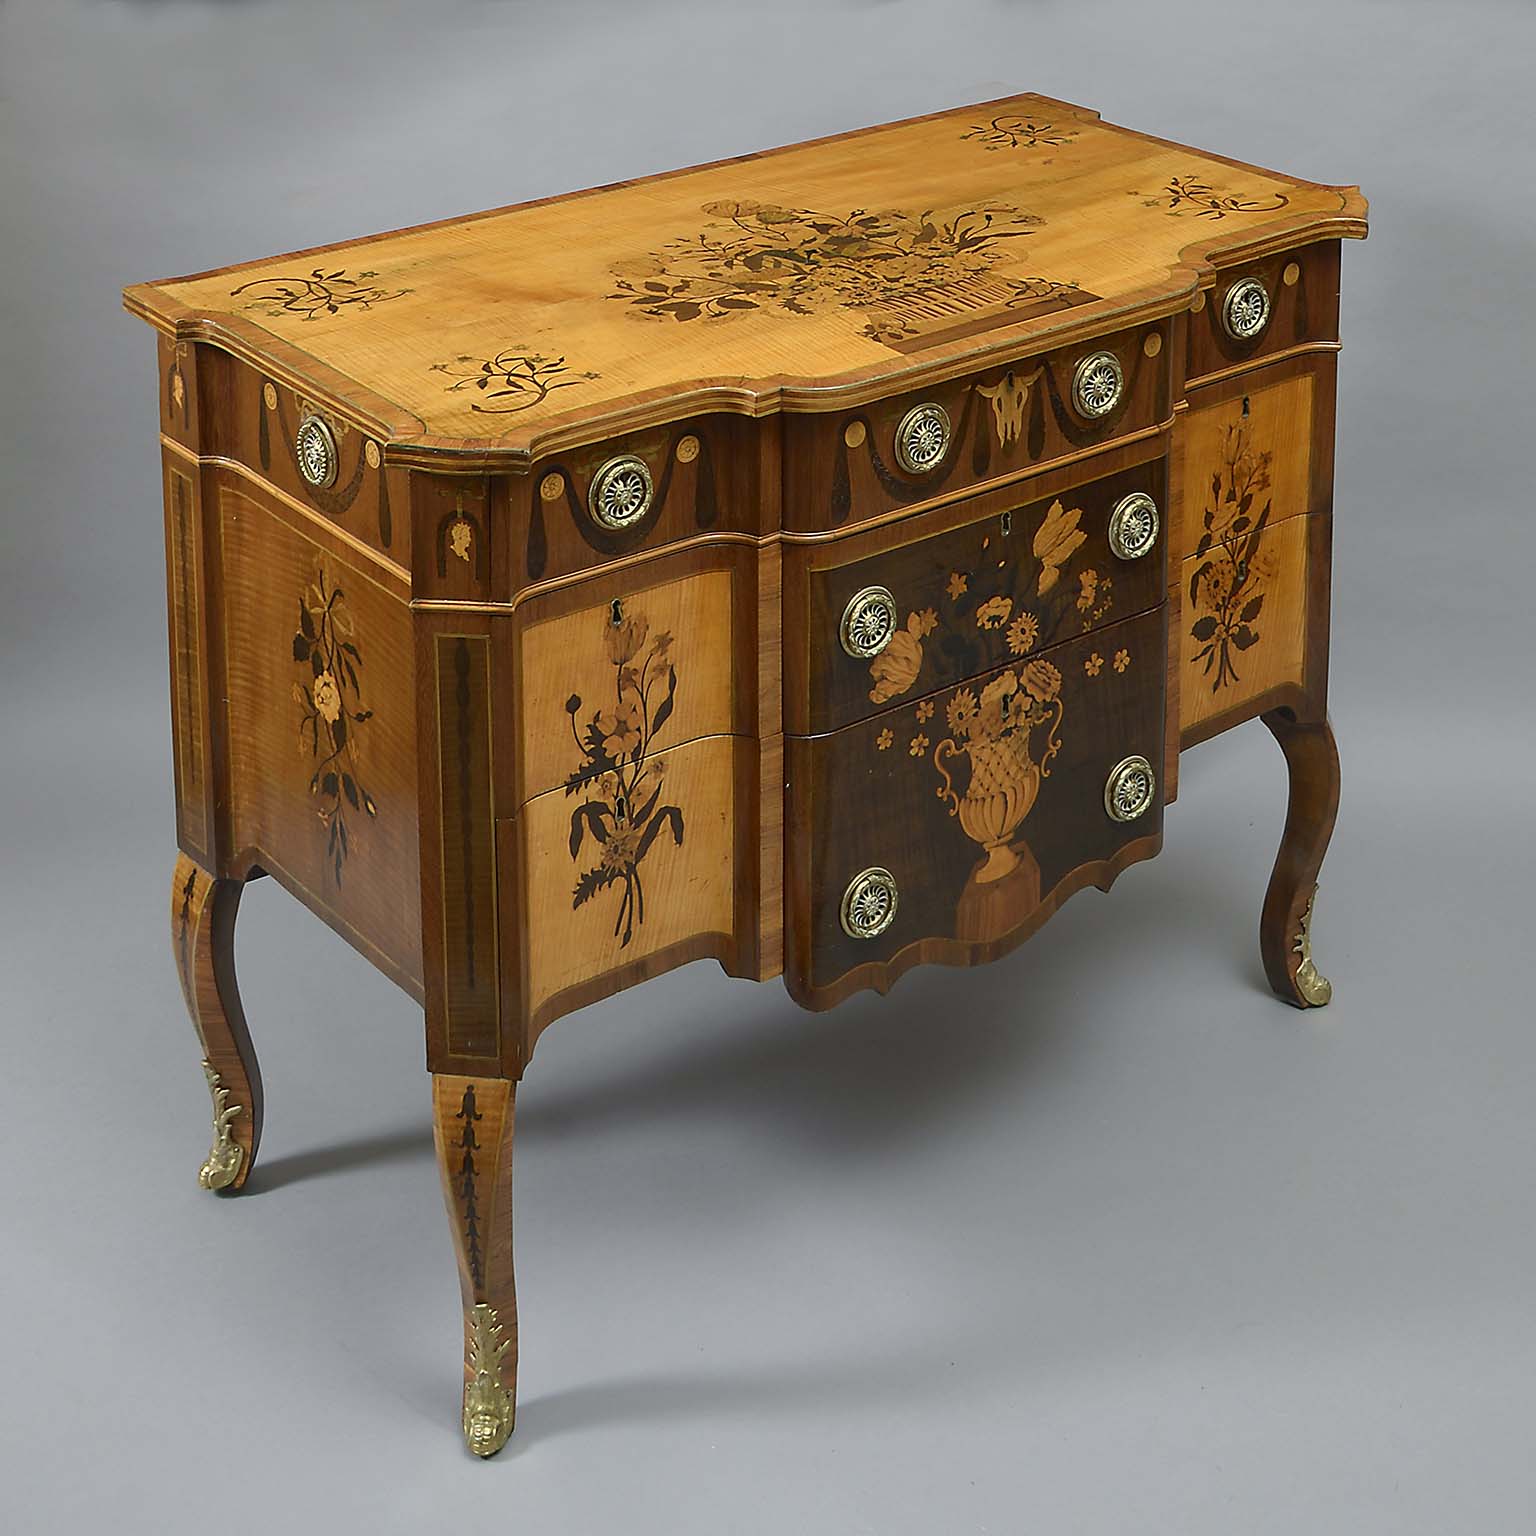 AN IMPORTANT MATCHED PAIR OF IRISH GEORGE III SYCAMORE, AMARANTH AND MARQUETRY COMMODES